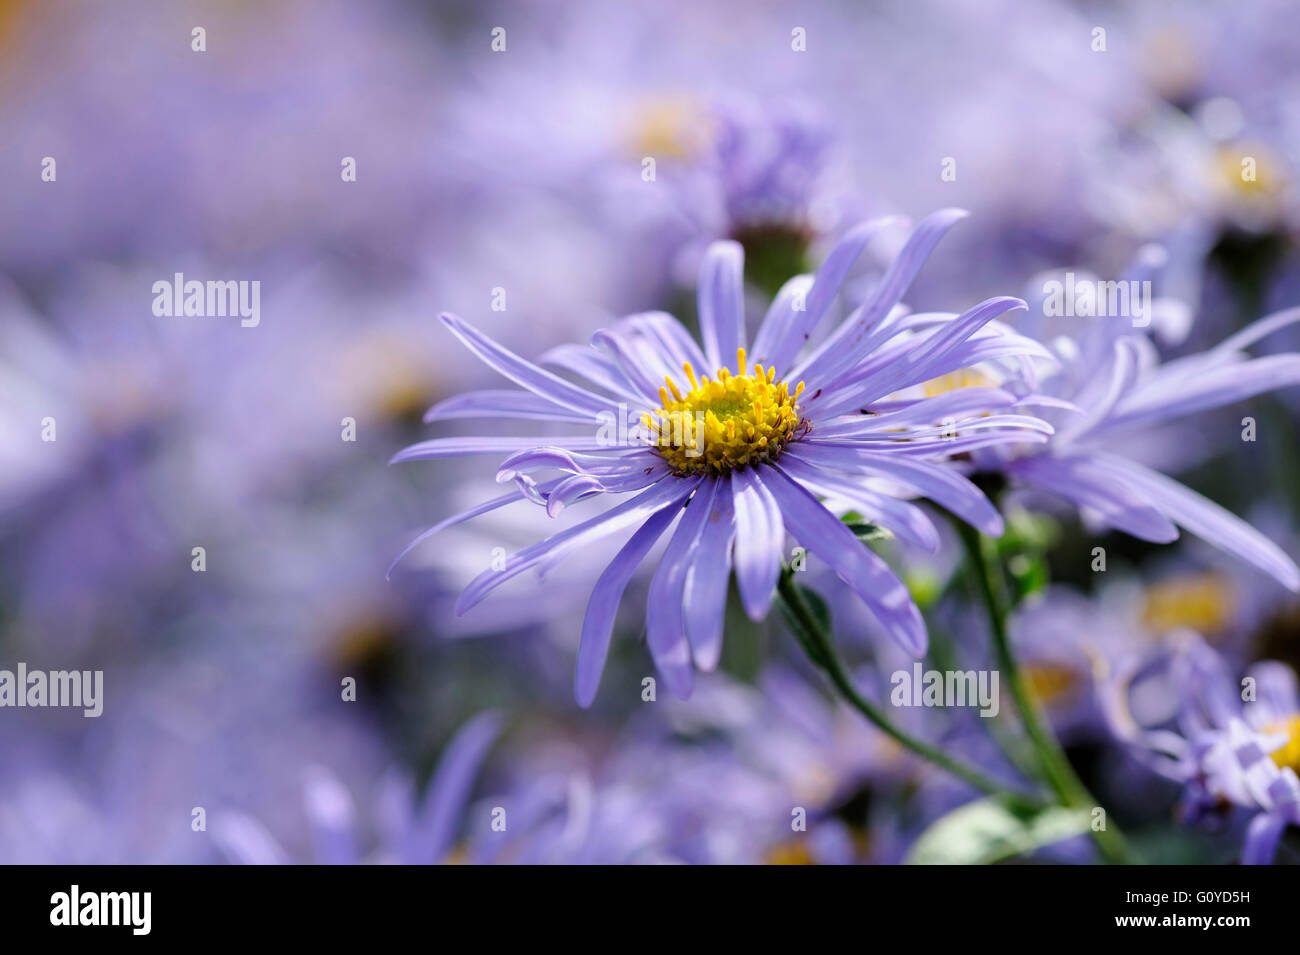 Daisy, Michaelmas daisy , Aster, Aster x frikartii 'Monch', Beauty in Nature, Colour, Cottage garden plant, Flower, Autumn Flowering, Summer Flowering, Frikart's Aster, Frost hardy, Growing, Outdoor, Perennial, Plant, Stamen, Mauve, Stock Photo